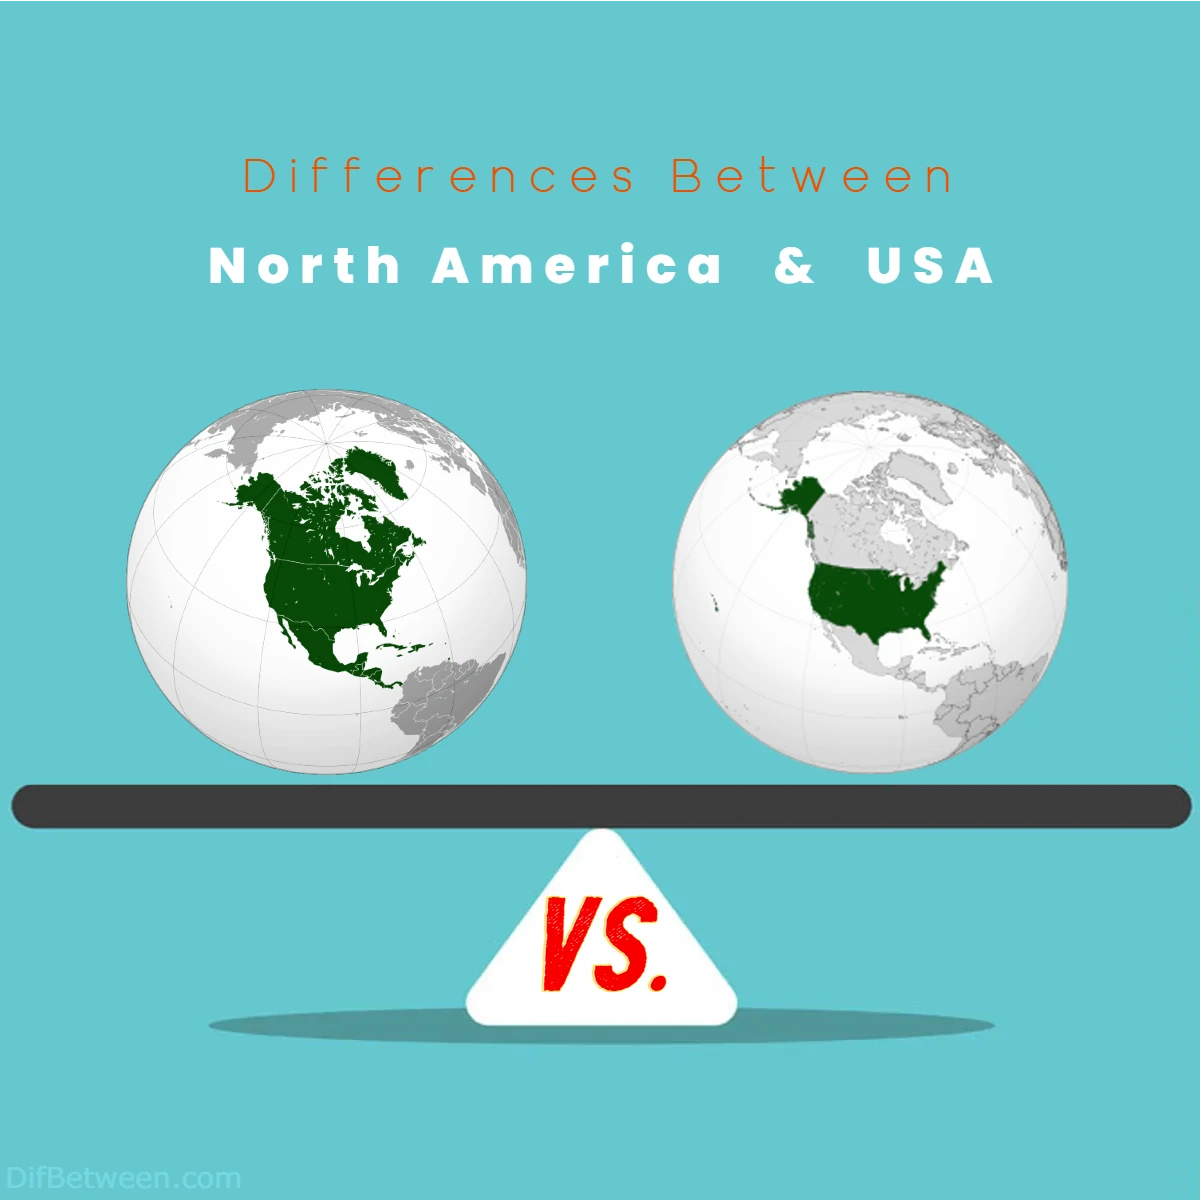 Differences Between North America vs USA